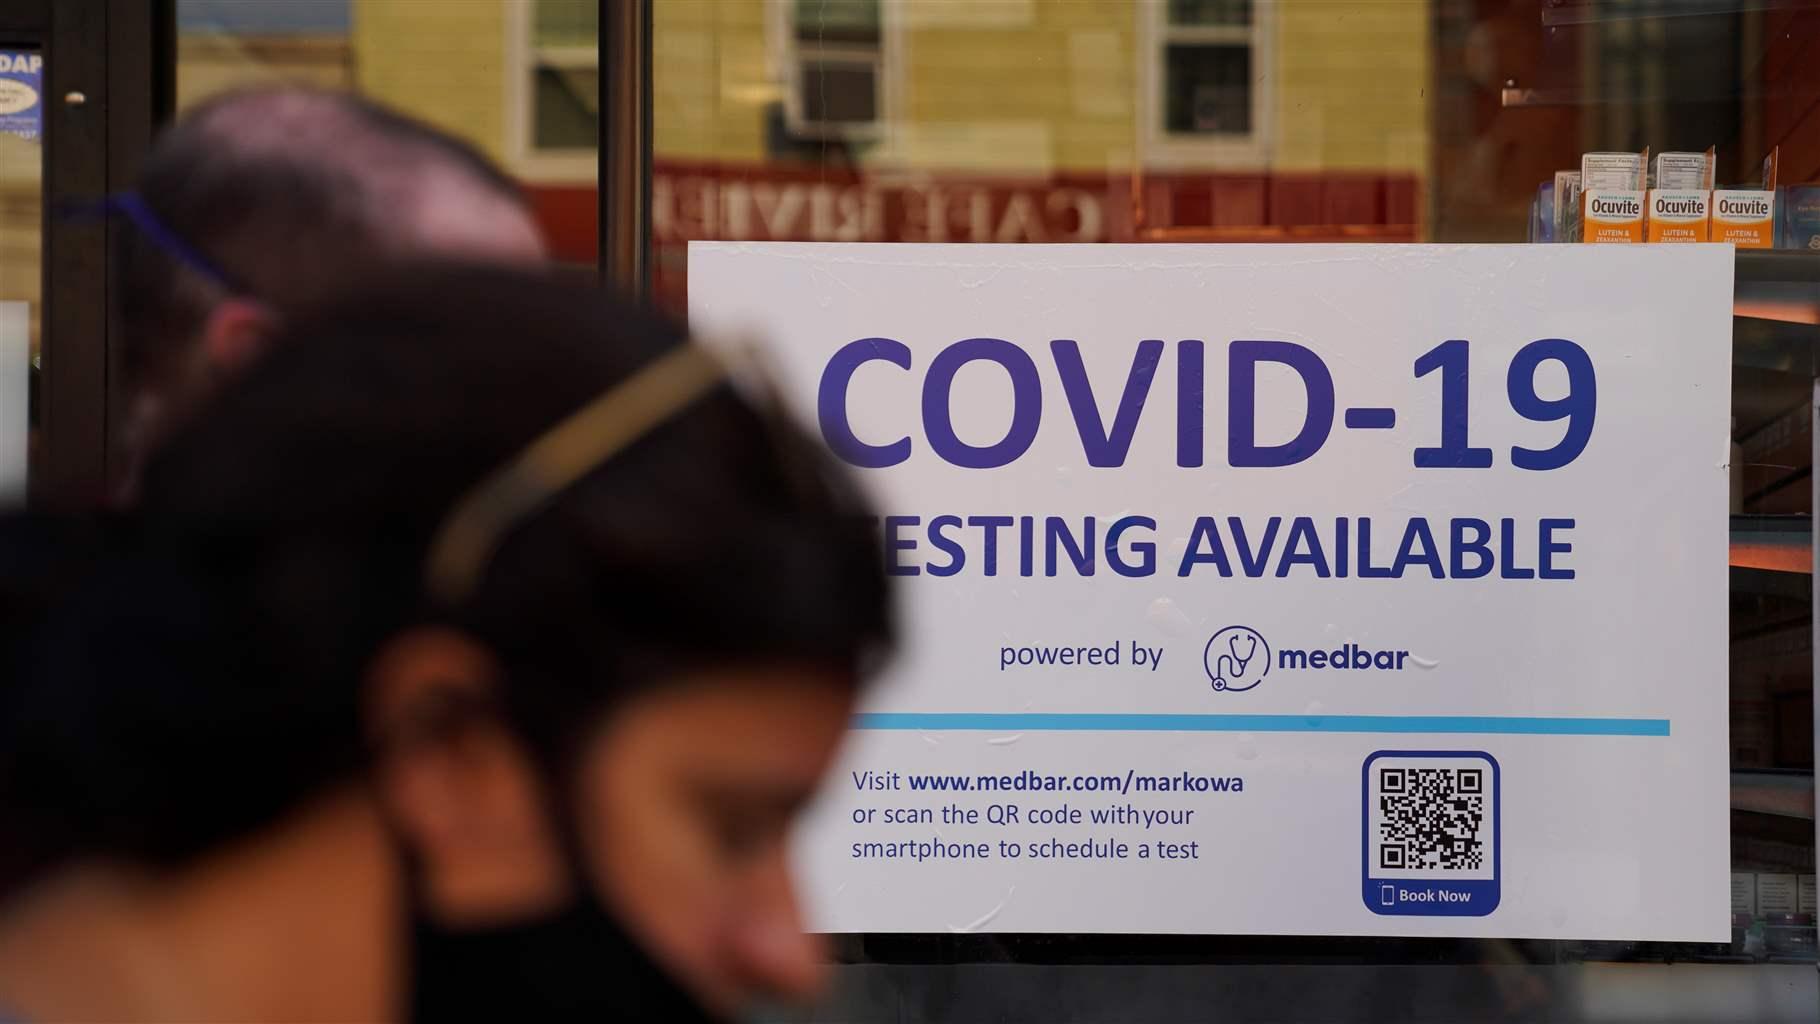 A pedestrian walks past a COVID-19 testing billboard in New York, the United States, July 26, 2021.